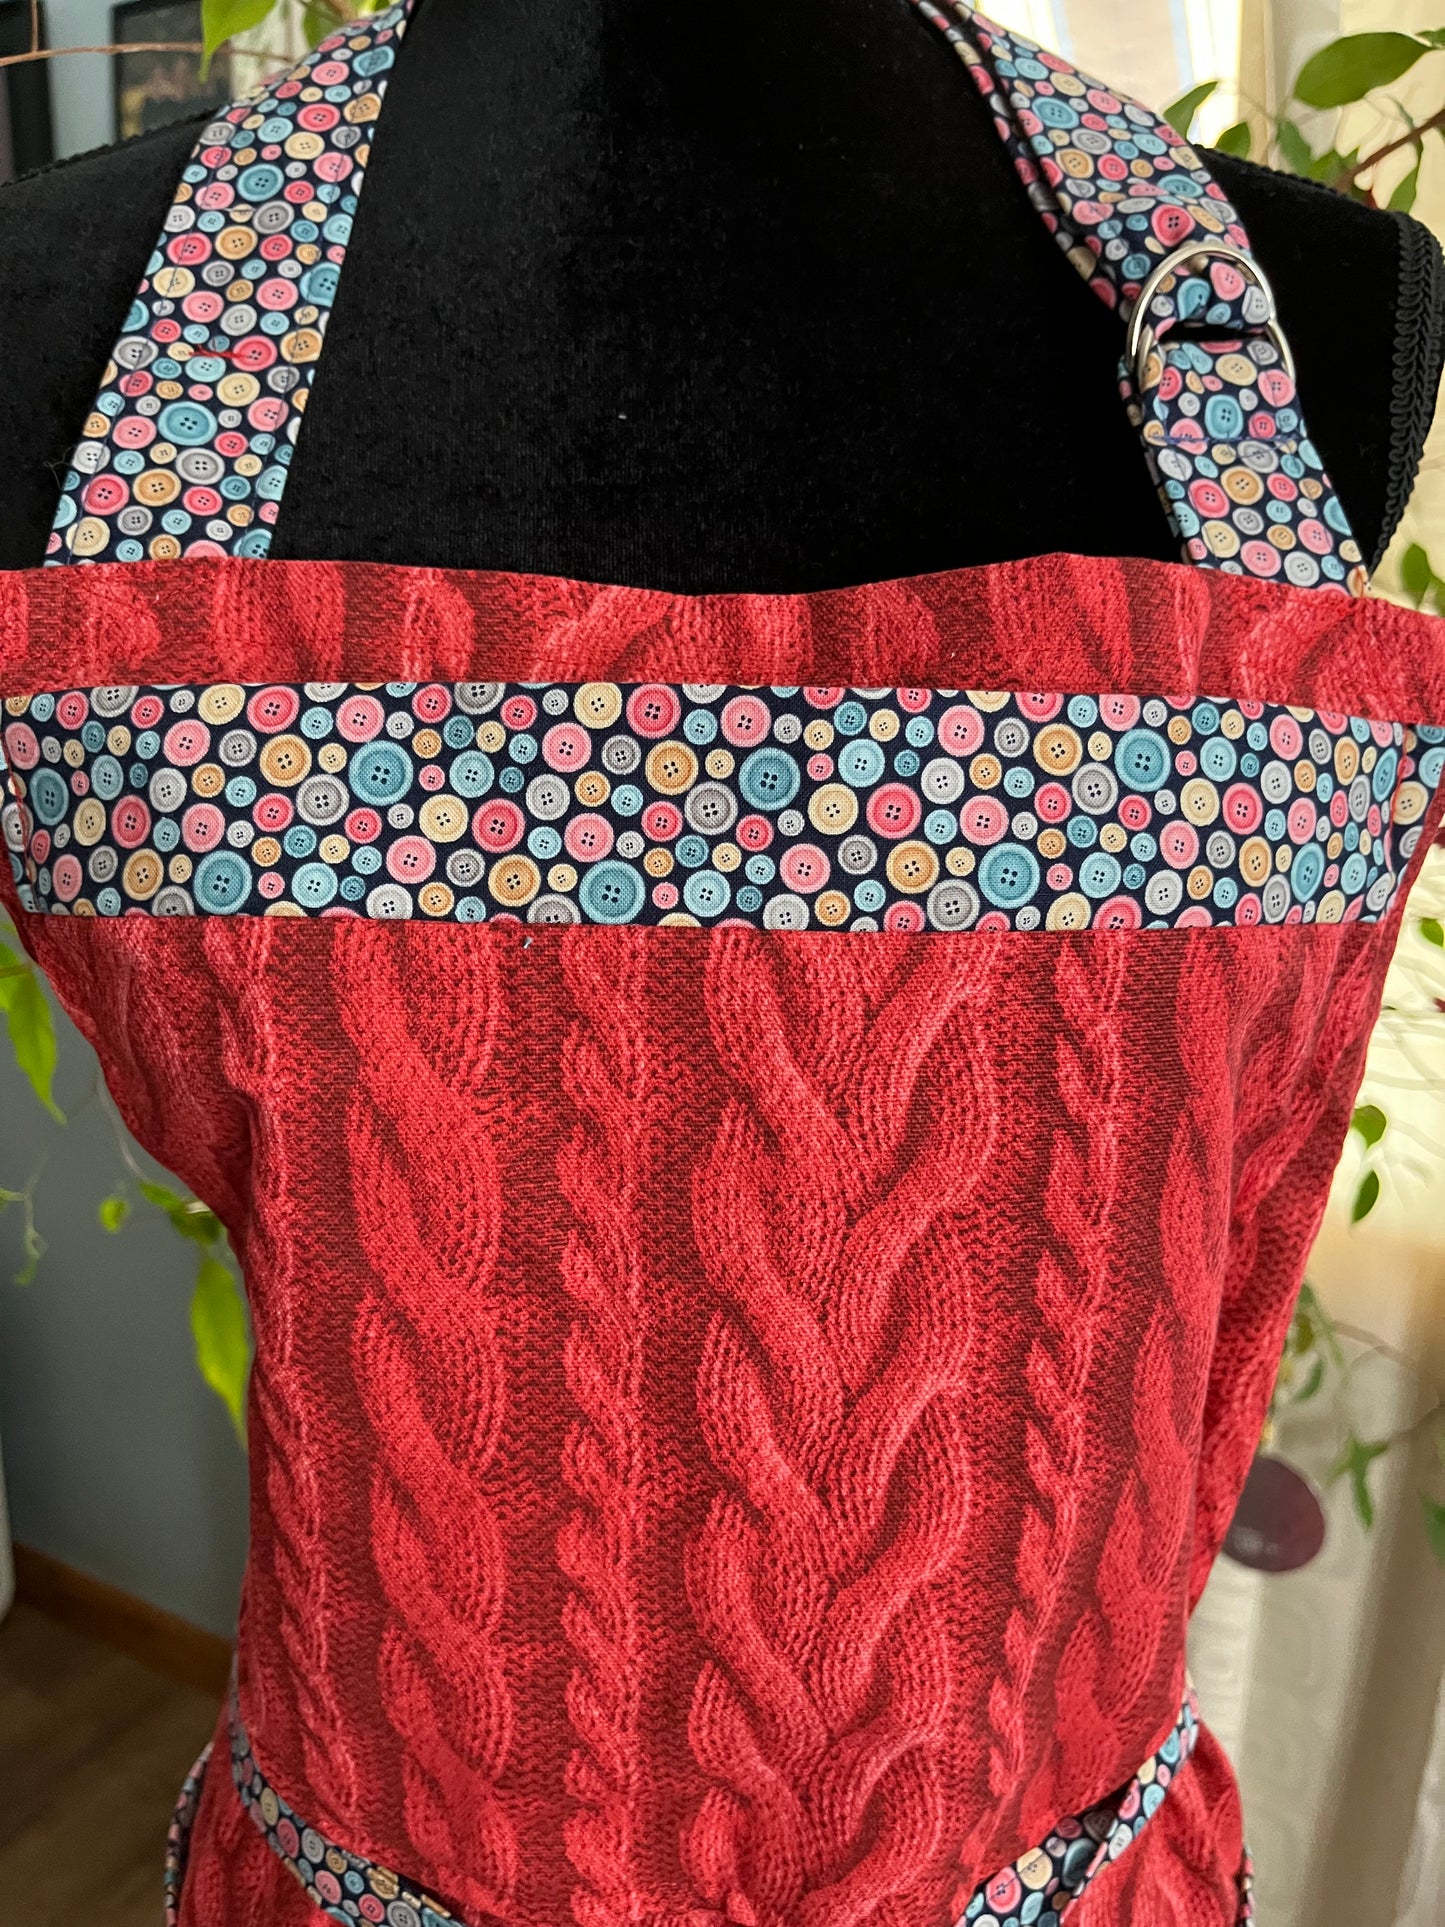 Split-leg Pottery Apron - Red Cable Knit Print with buttons trim